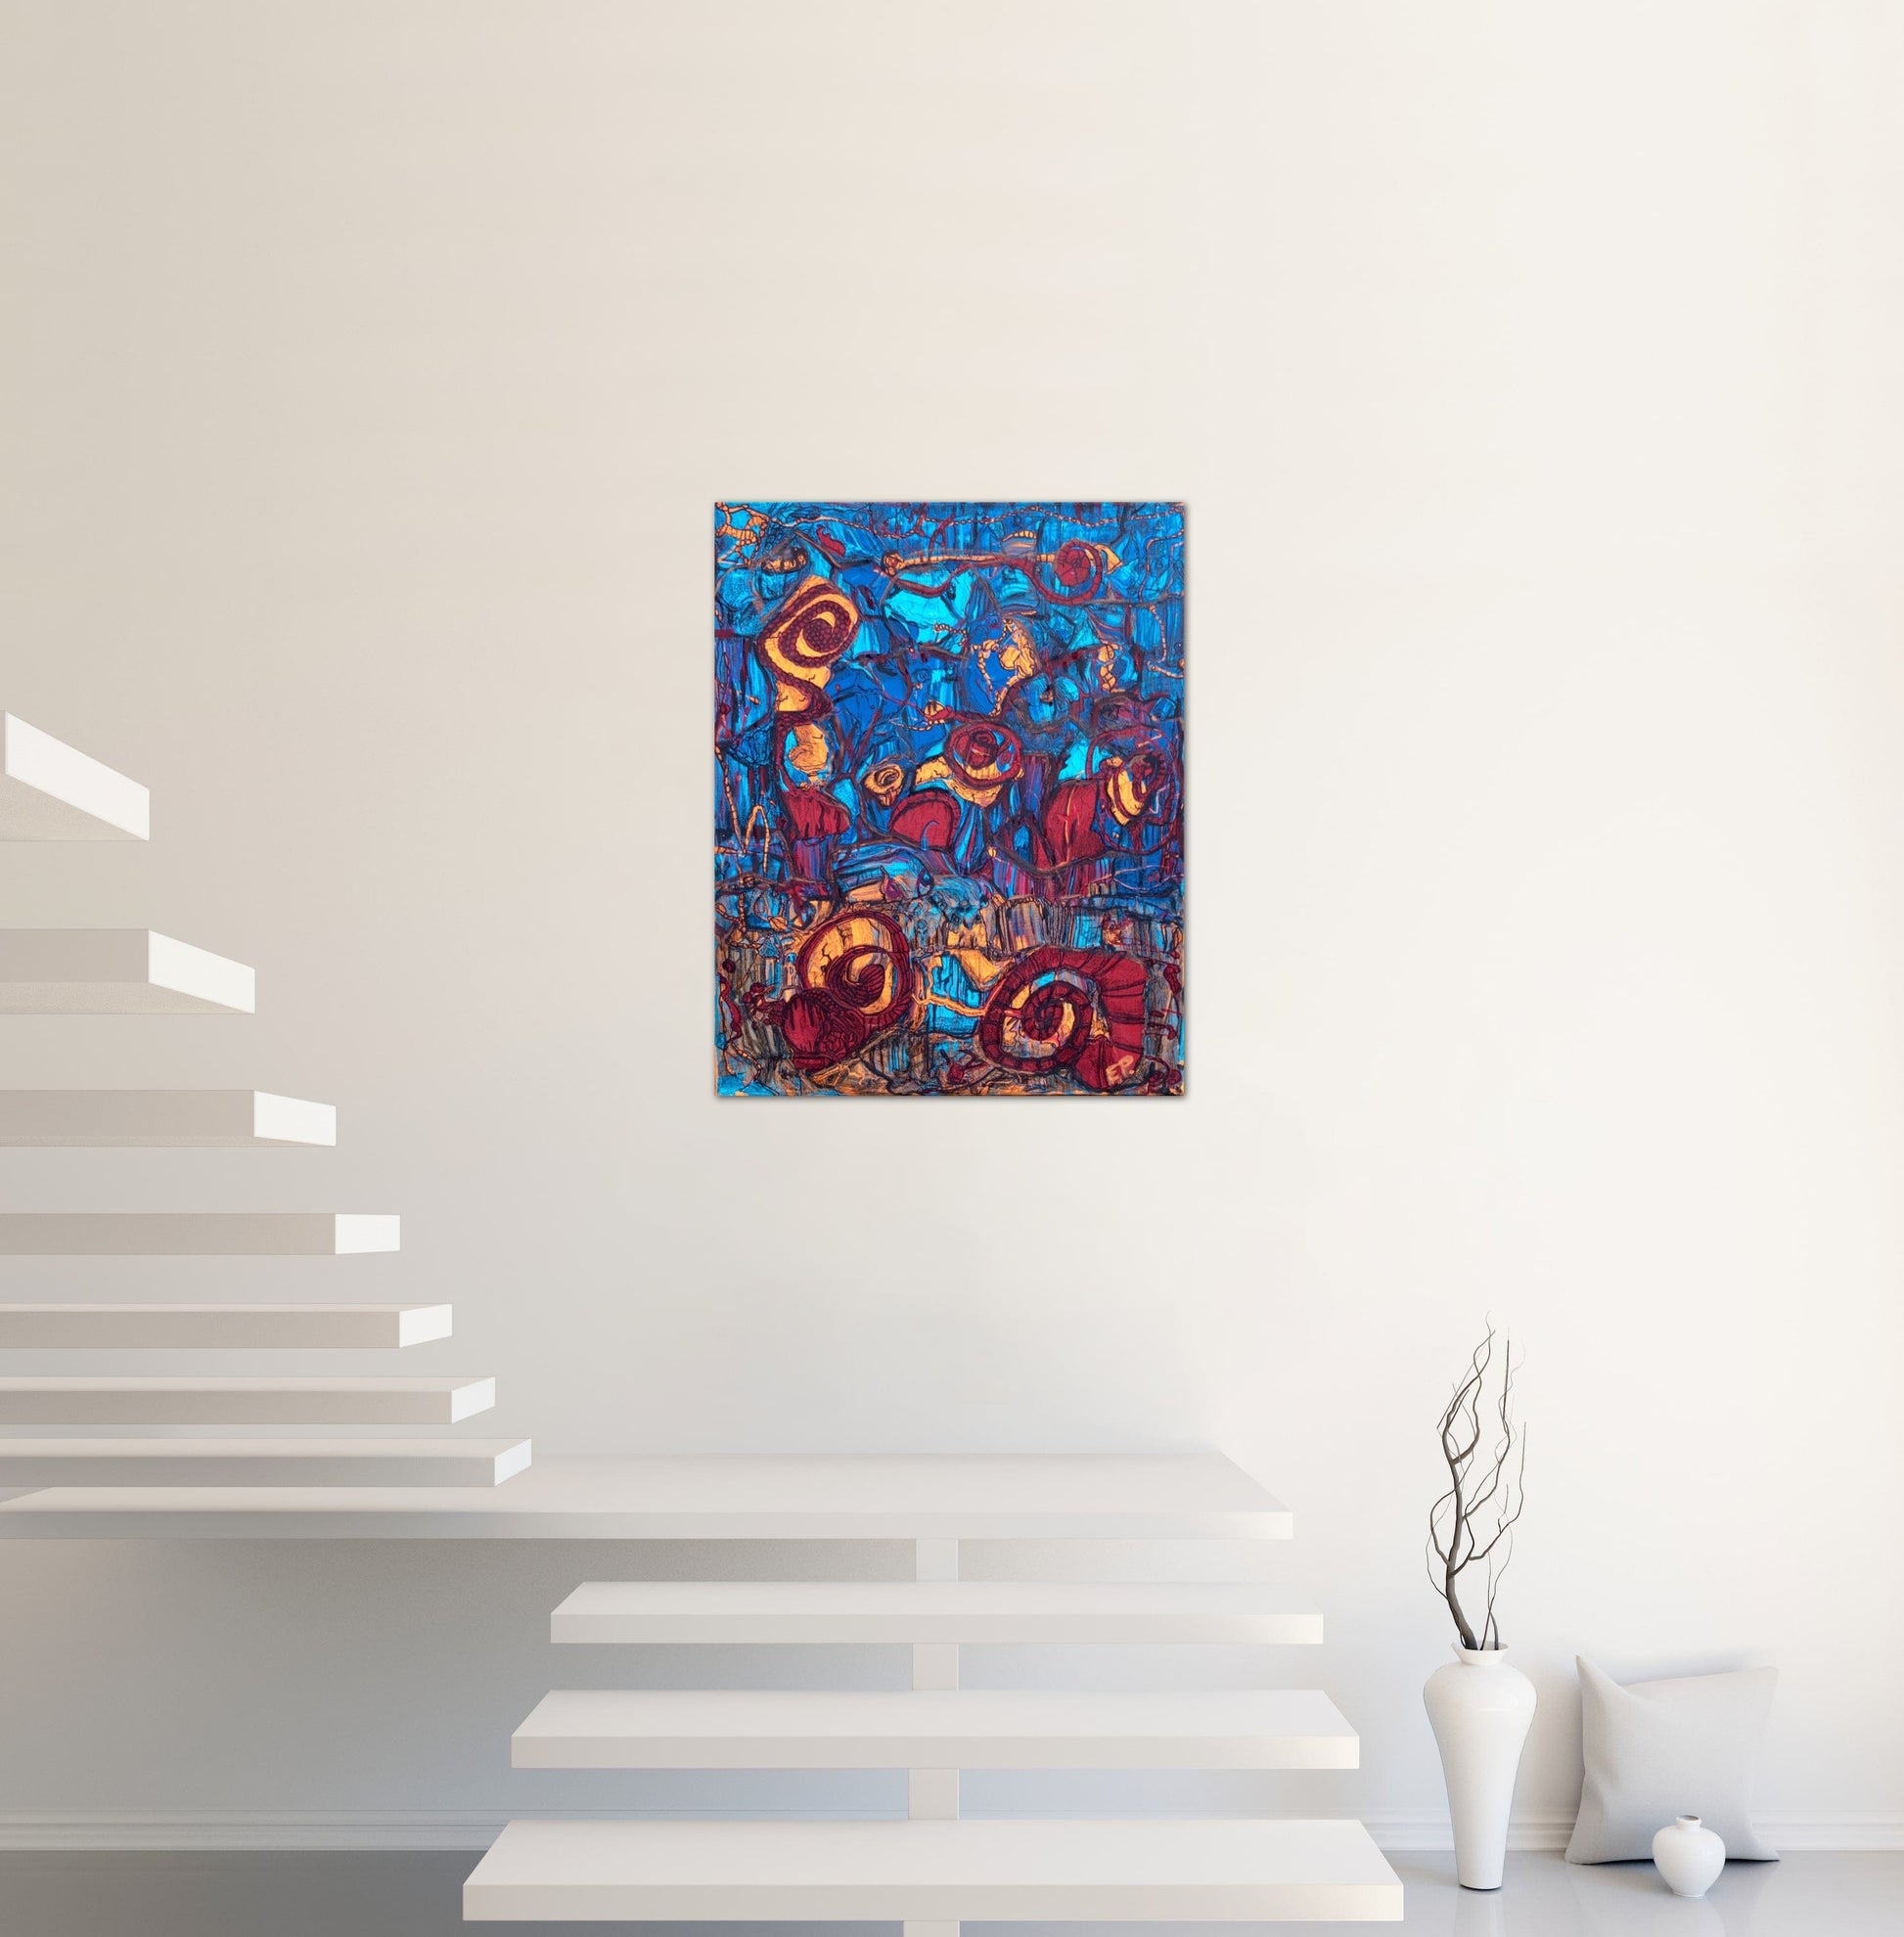 The Invasion - Medium Size, Bright And Colorful, Textured, Alien/Extraterrestrials Landing, Design Painting, by Art With Evie